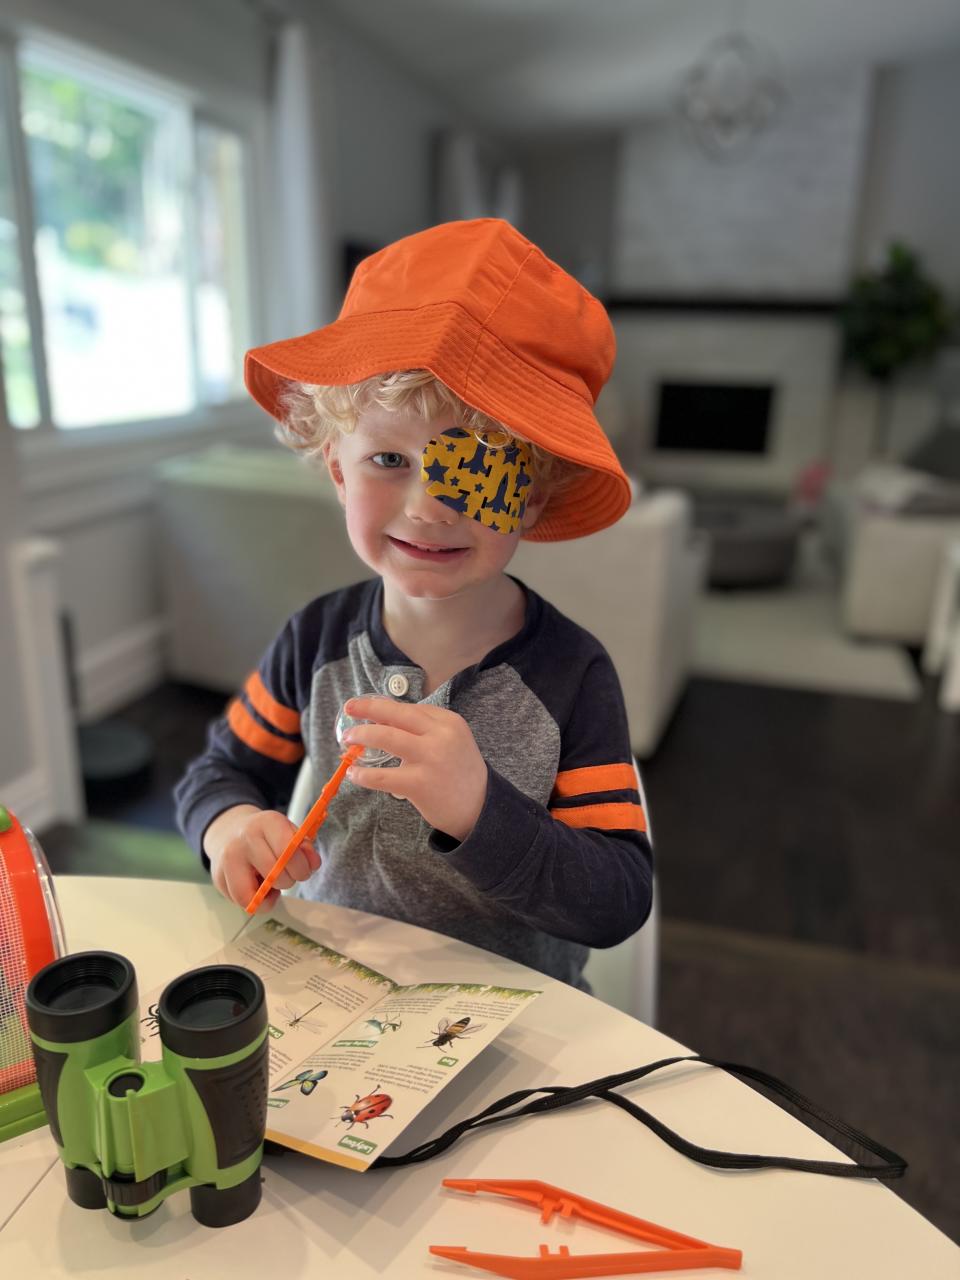 Four-year-old Everett is shown wears his eye patch every day. (Submitted)